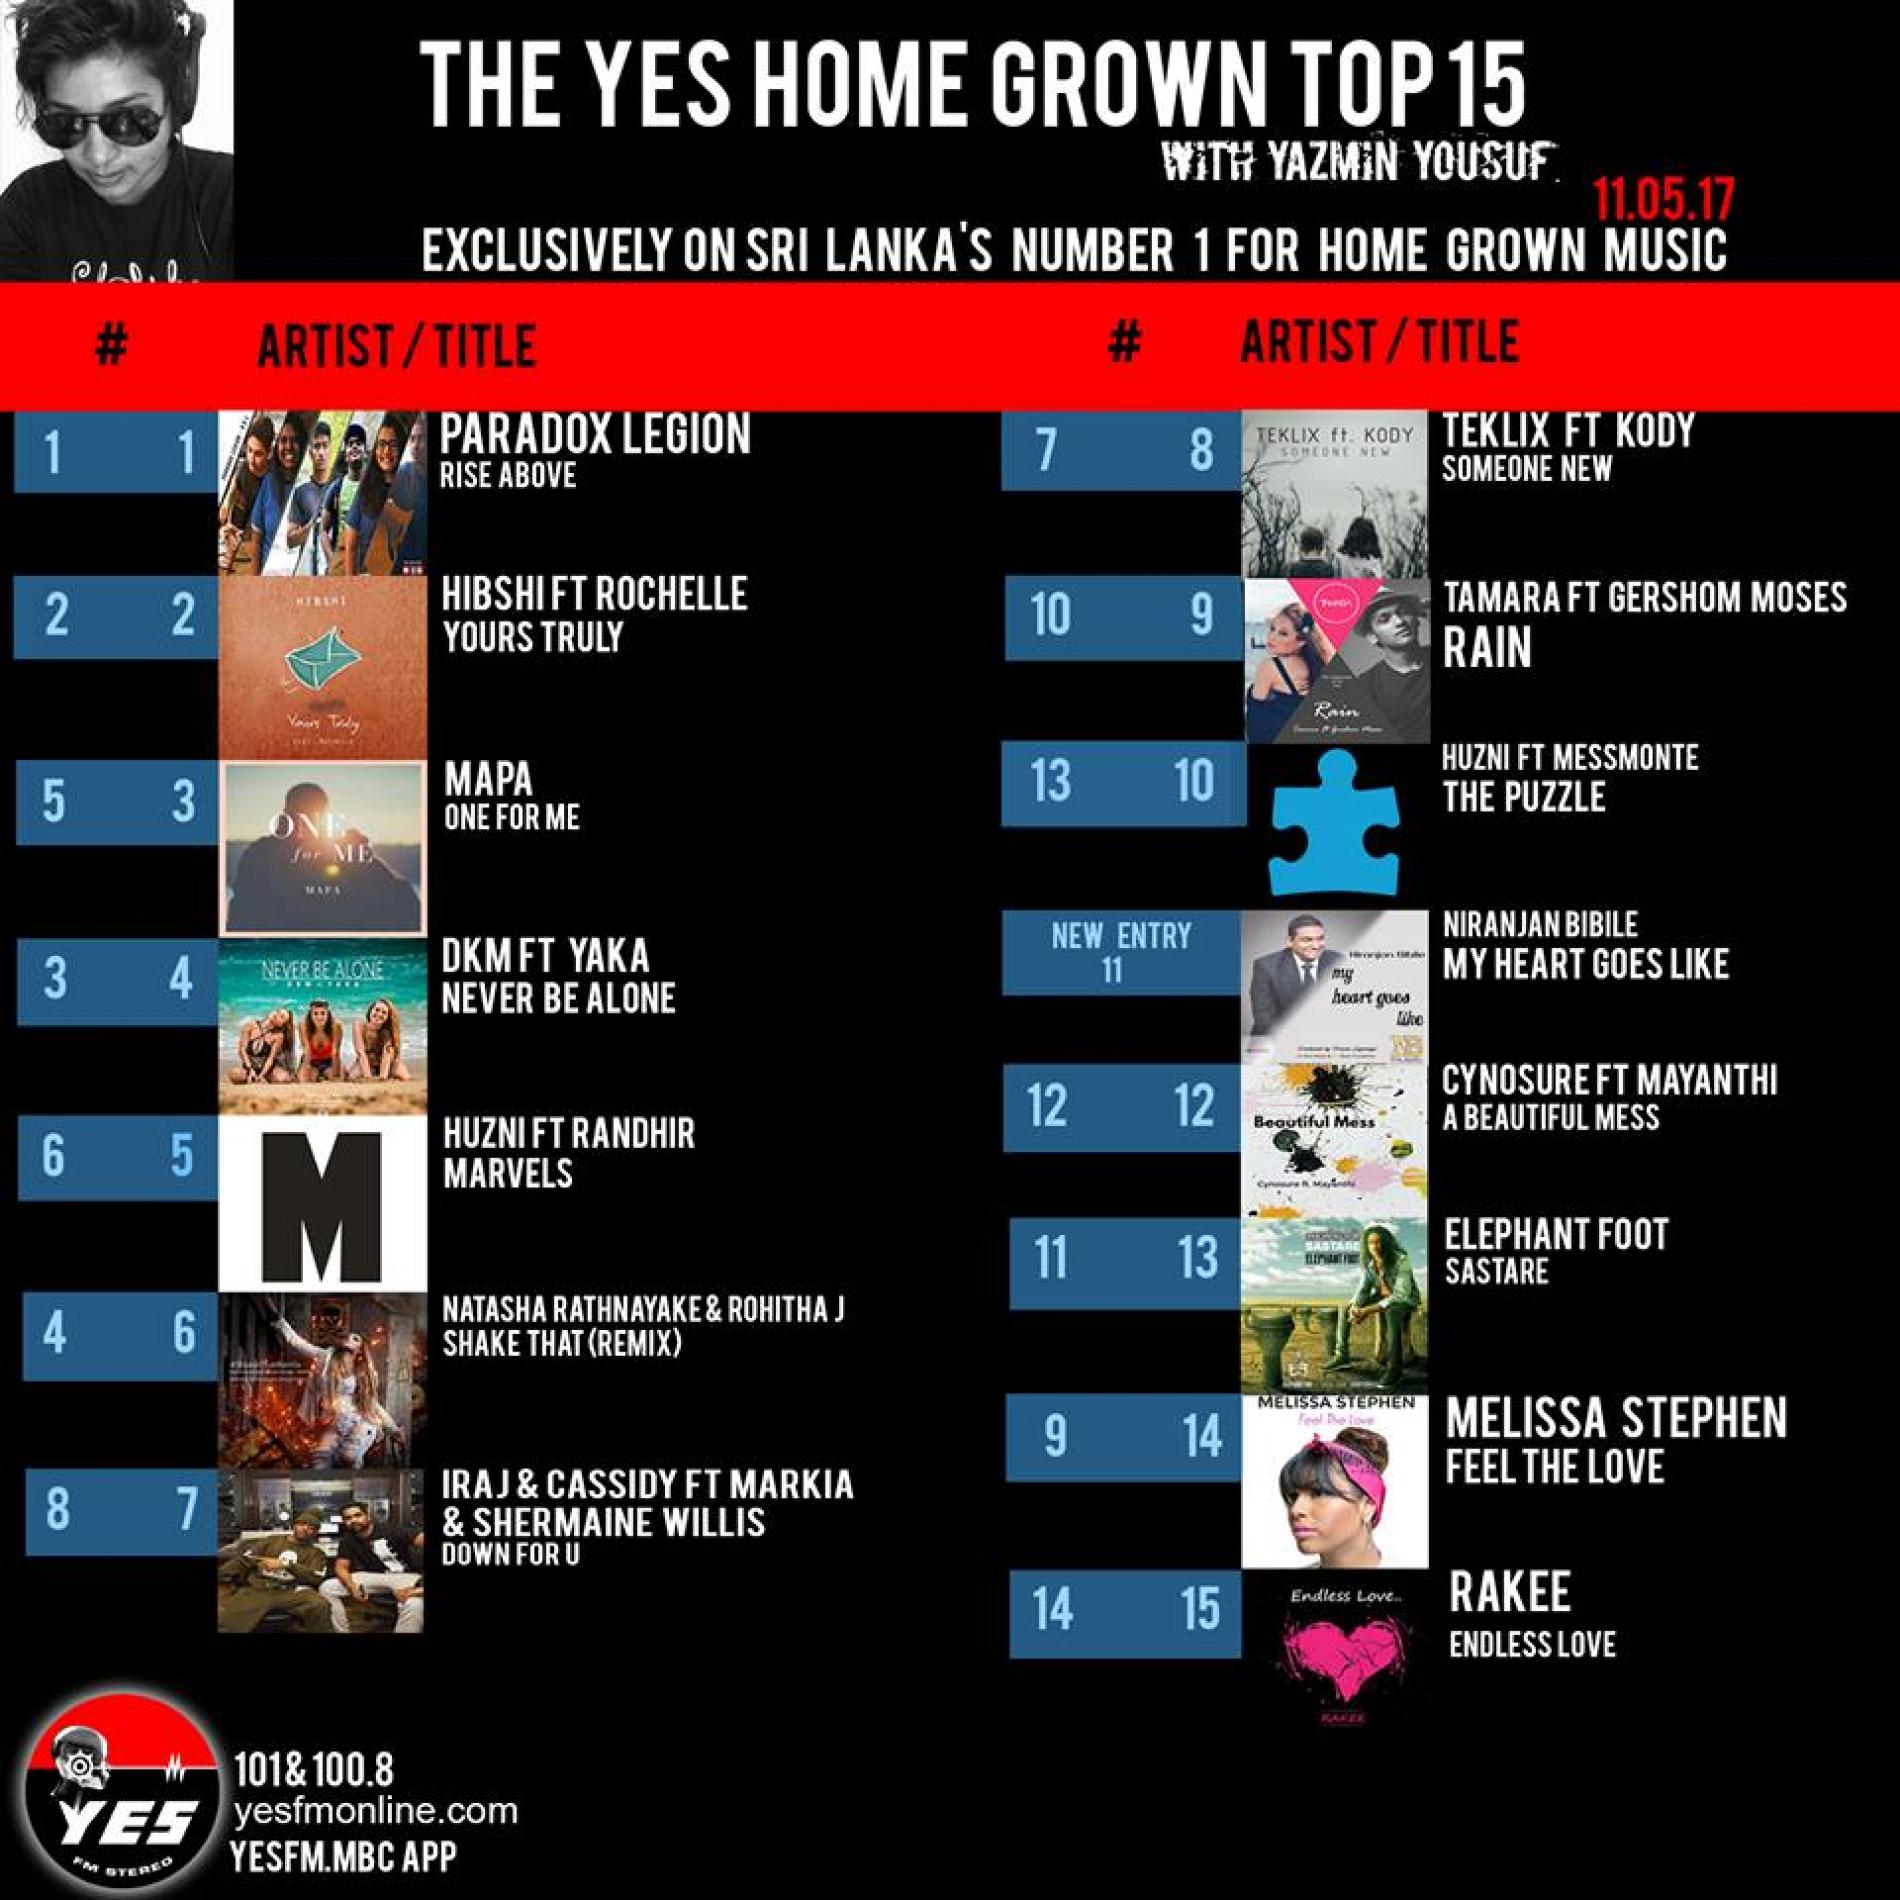 Paradox Legion Hits Number 1 Again On The YES Home Grown Top 15